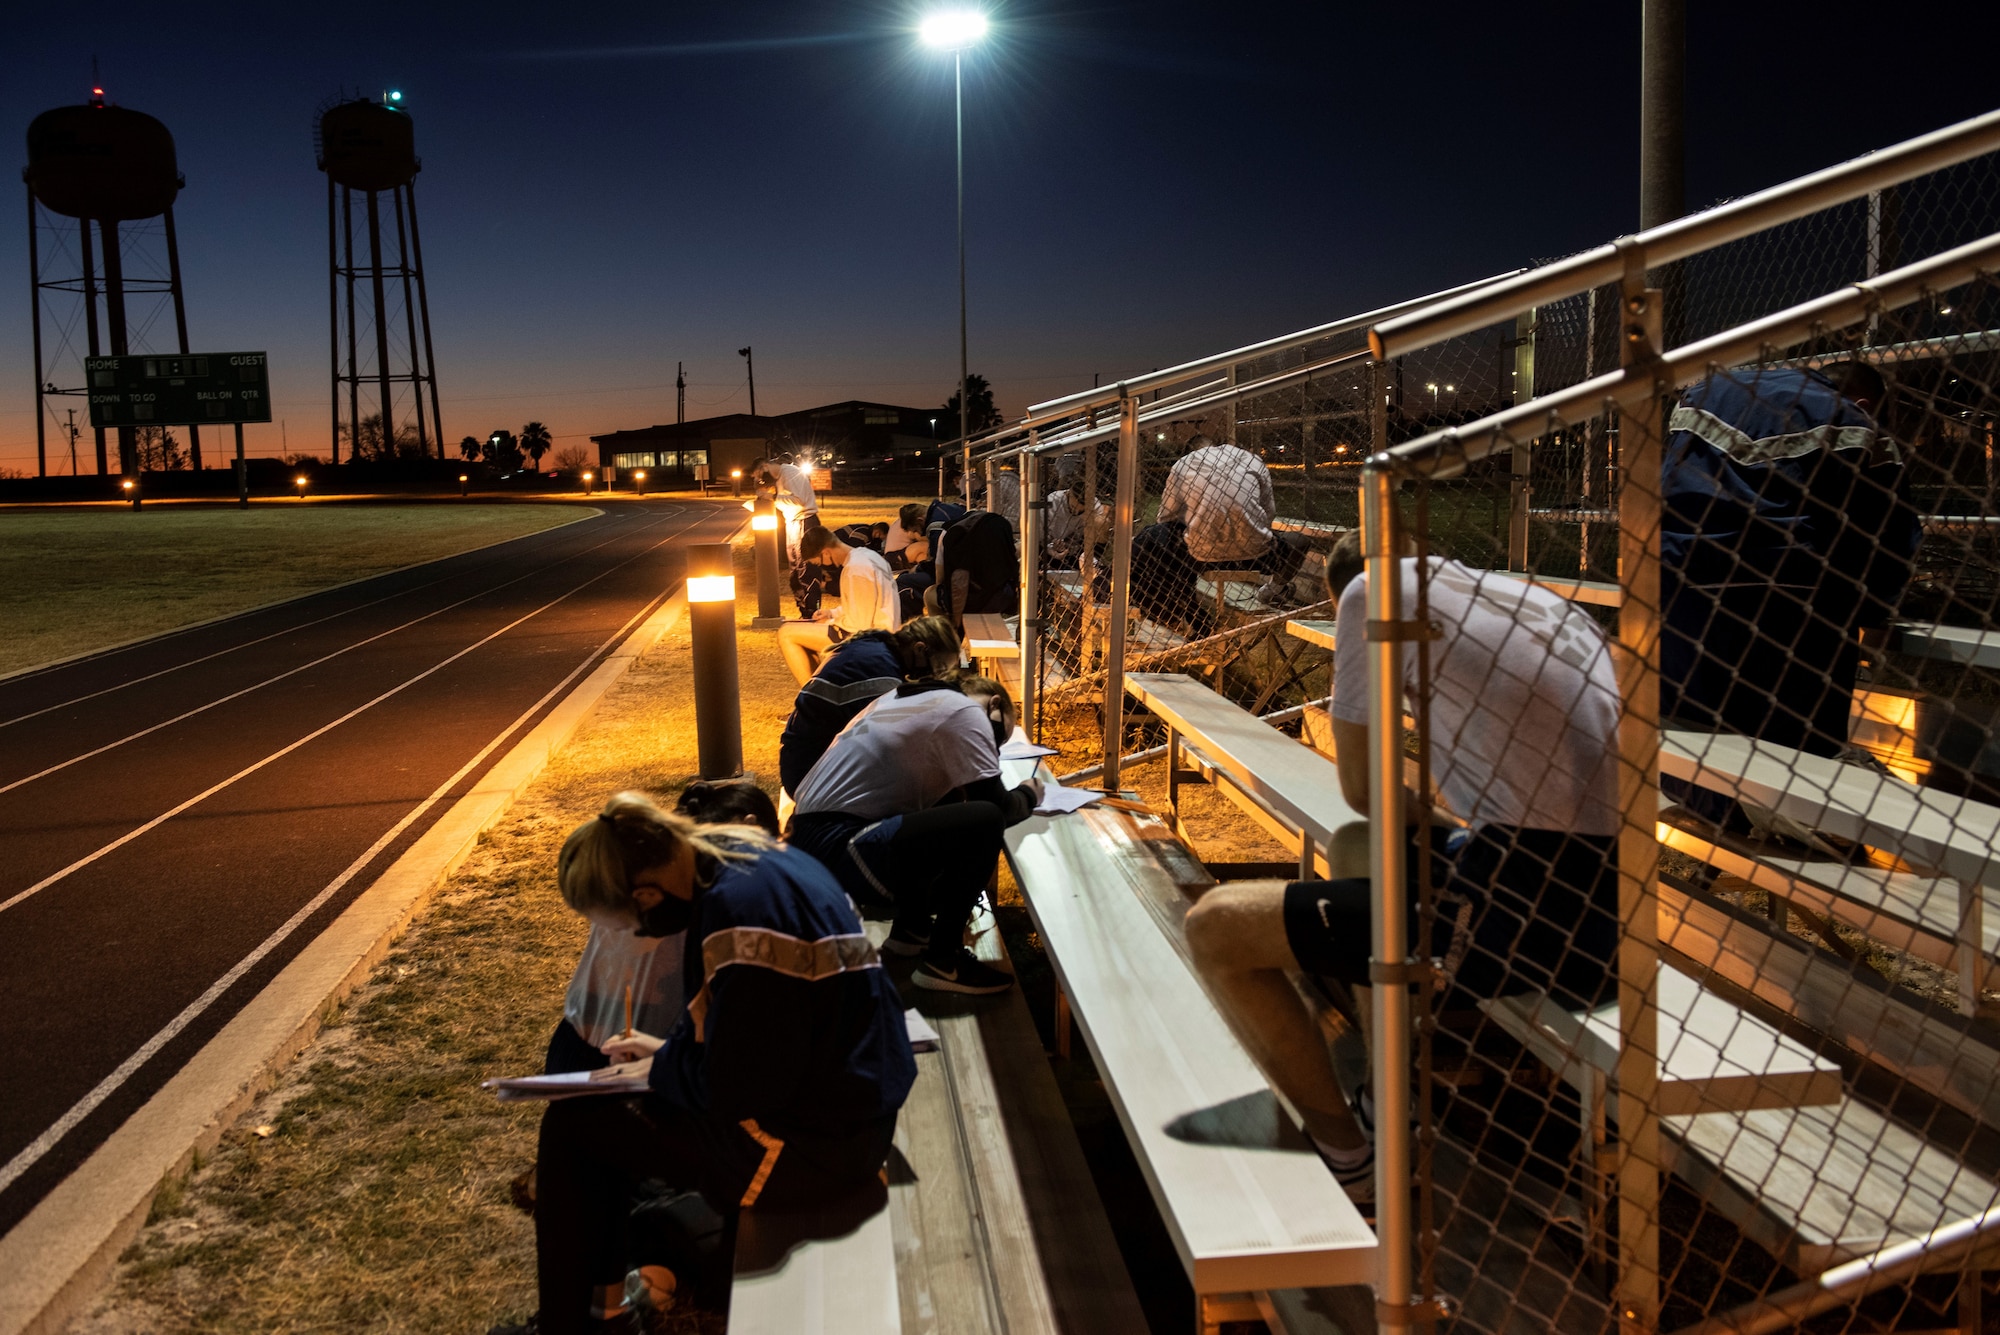 Student pilots filling out forms before starting their morning PT on Feb. 01, 2021 at Laughlin Air Force Base, Texas. During the course the students met at the track for their morning Pt. (U.S. Air Force photo by Airman 1st Class David Phaff)